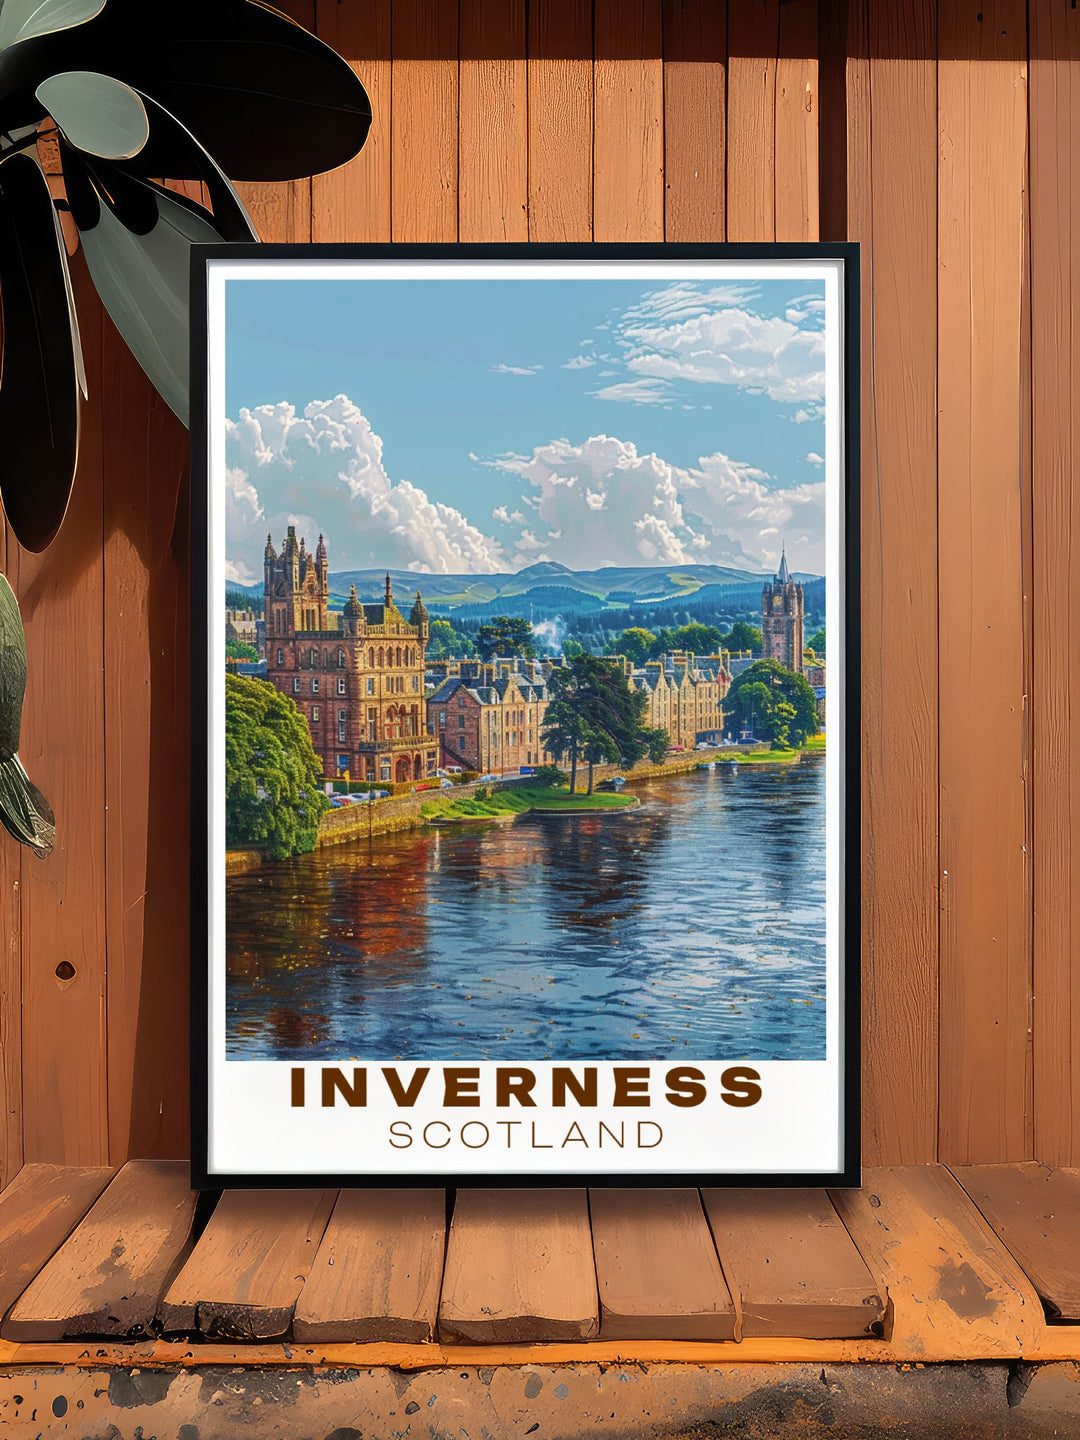 Framed art showcasing the tranquil Ness Islands with their lush greenery and Victorian bridges, ideal for creating a serene atmosphere.